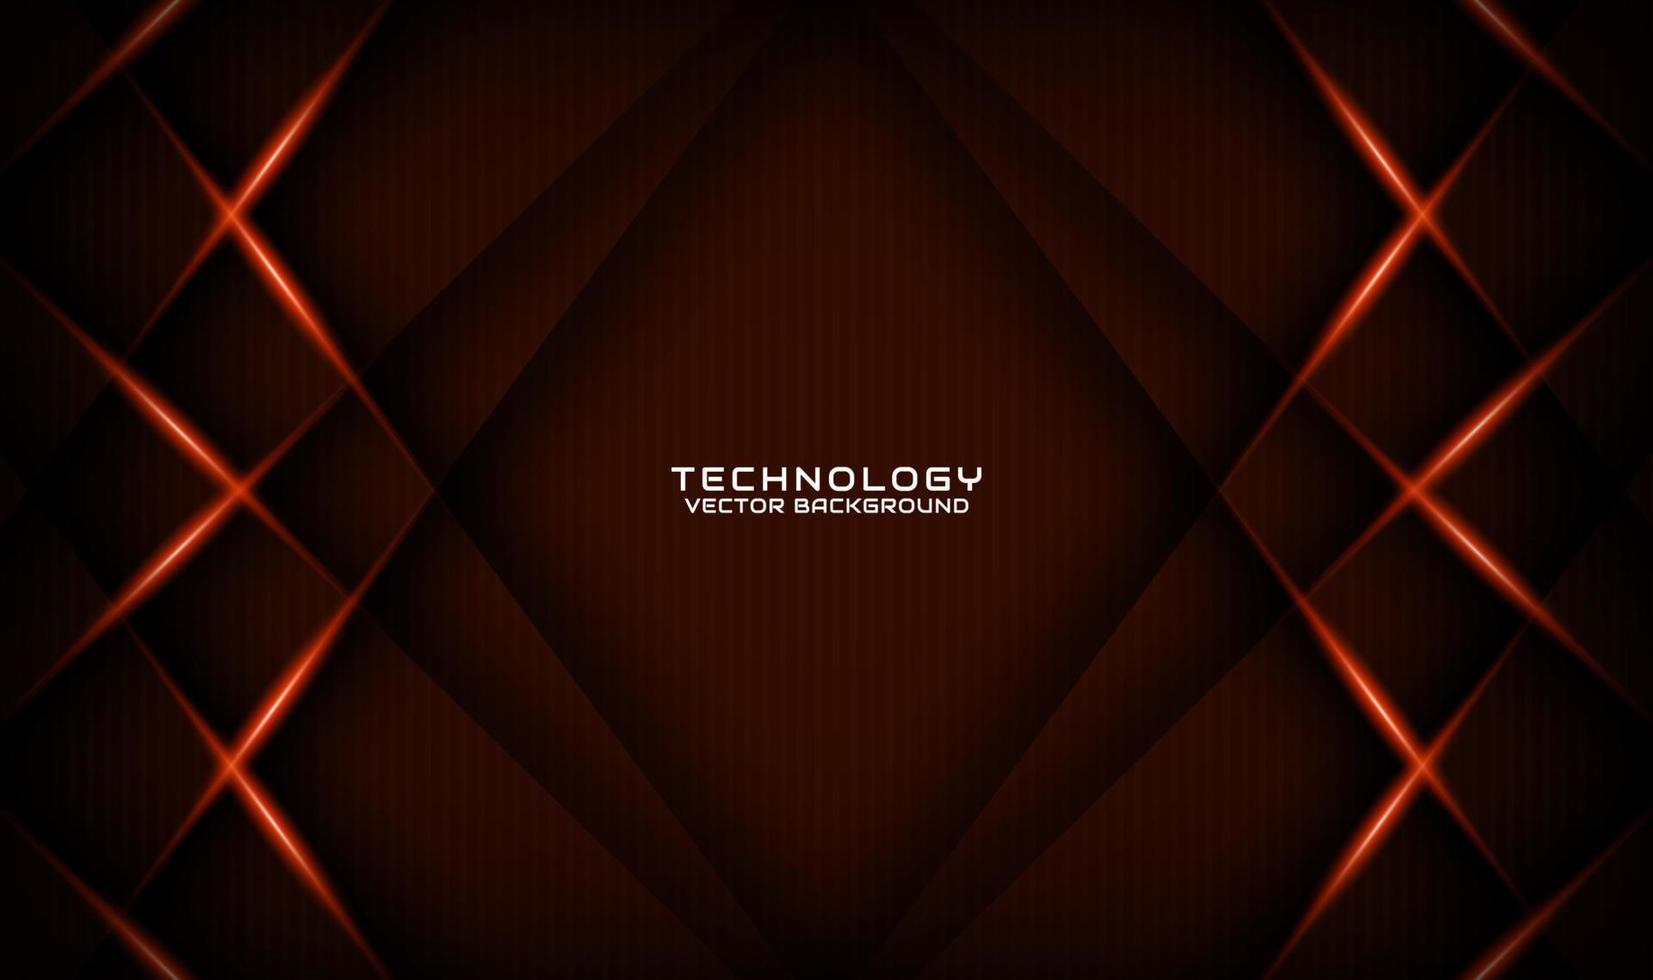 3D brown technology abstract background overlap layer on dark space with orange light effect decoration. Graphic design element future style concept for flyer, banner, brochure cover, or landing page vector